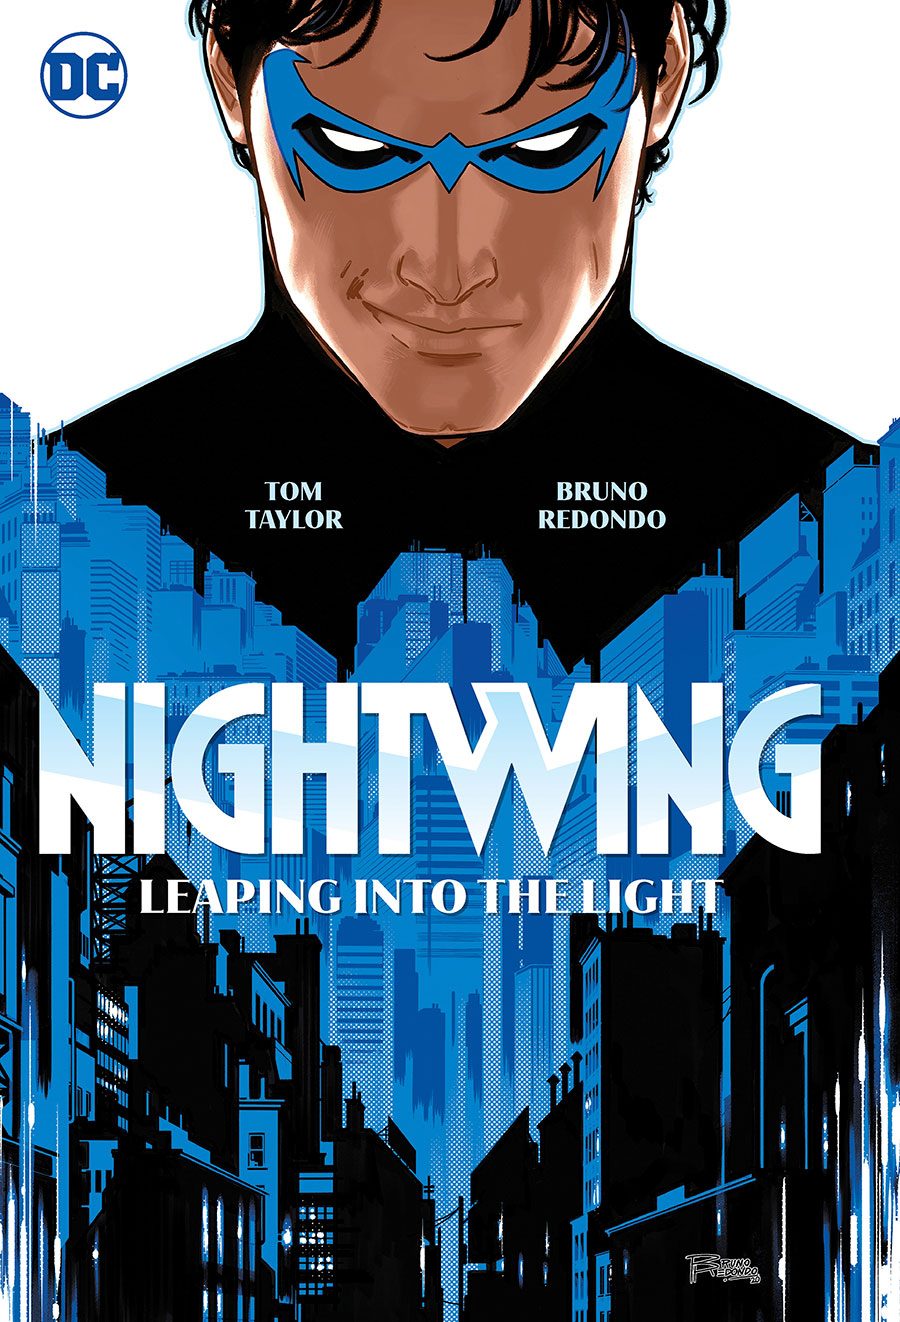 Nightwing (2021) Vol 1 Leaping Into The Light TP